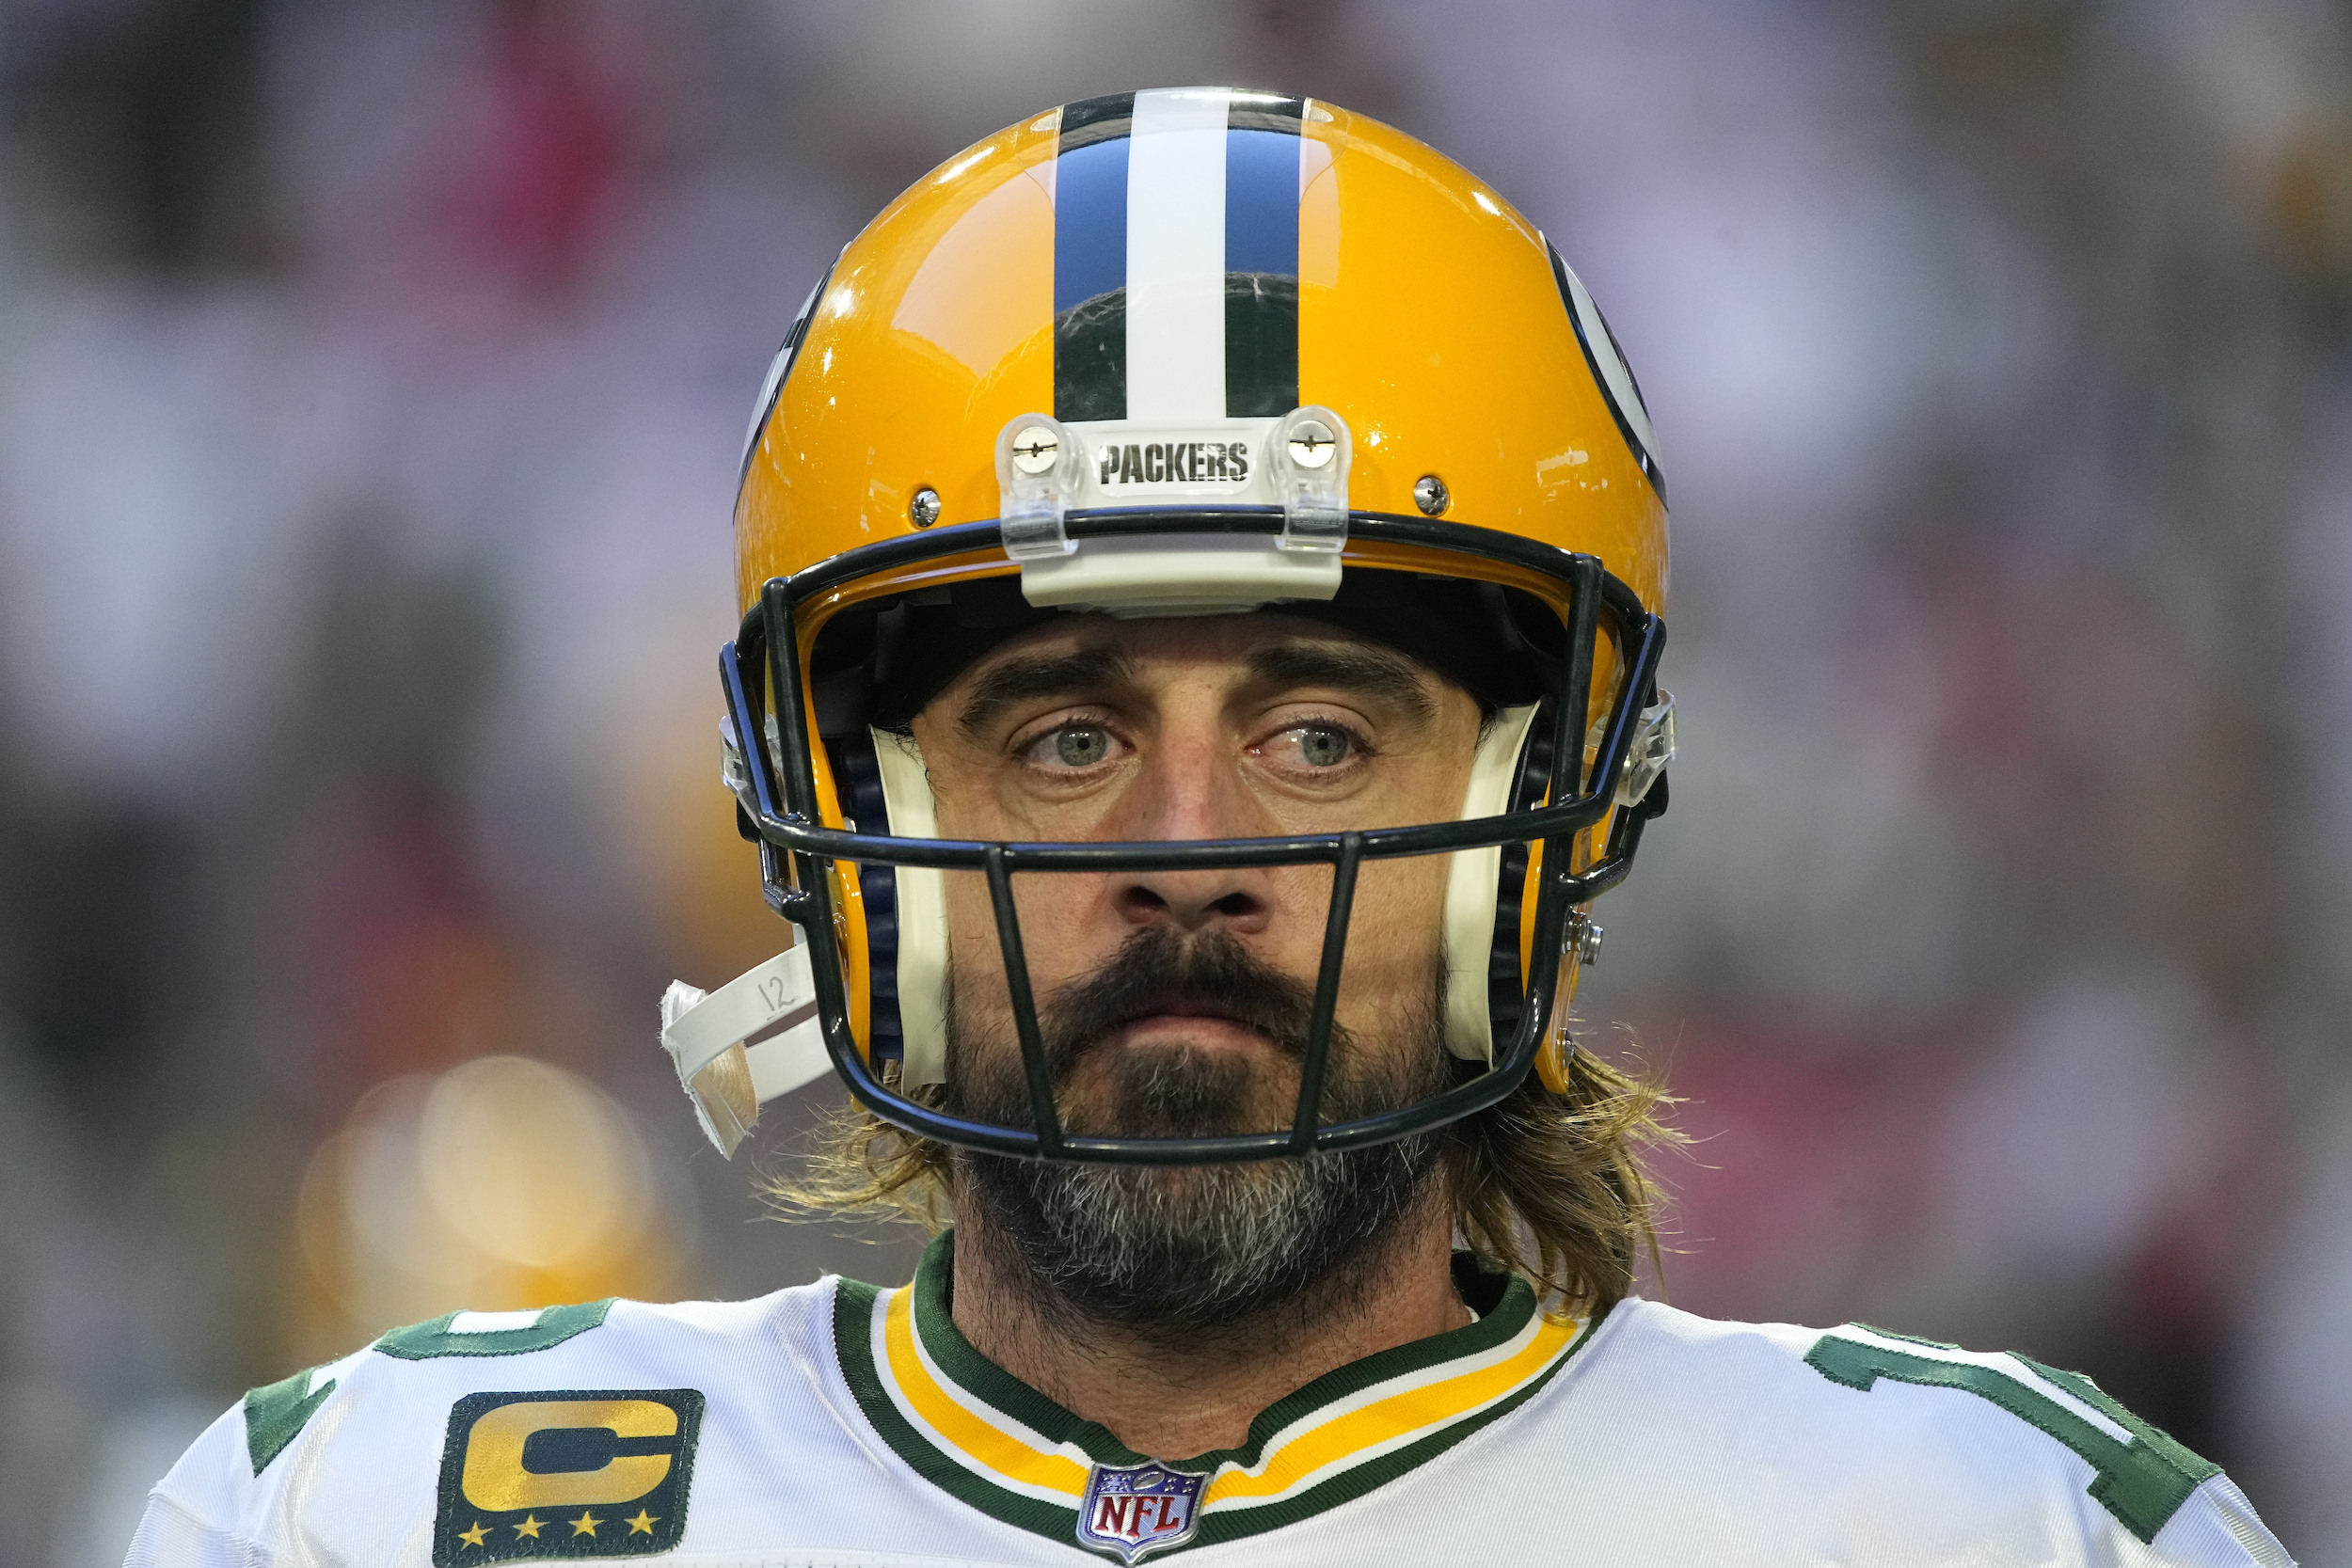 Journalists should directly address Aaron Rodgers' concerns over